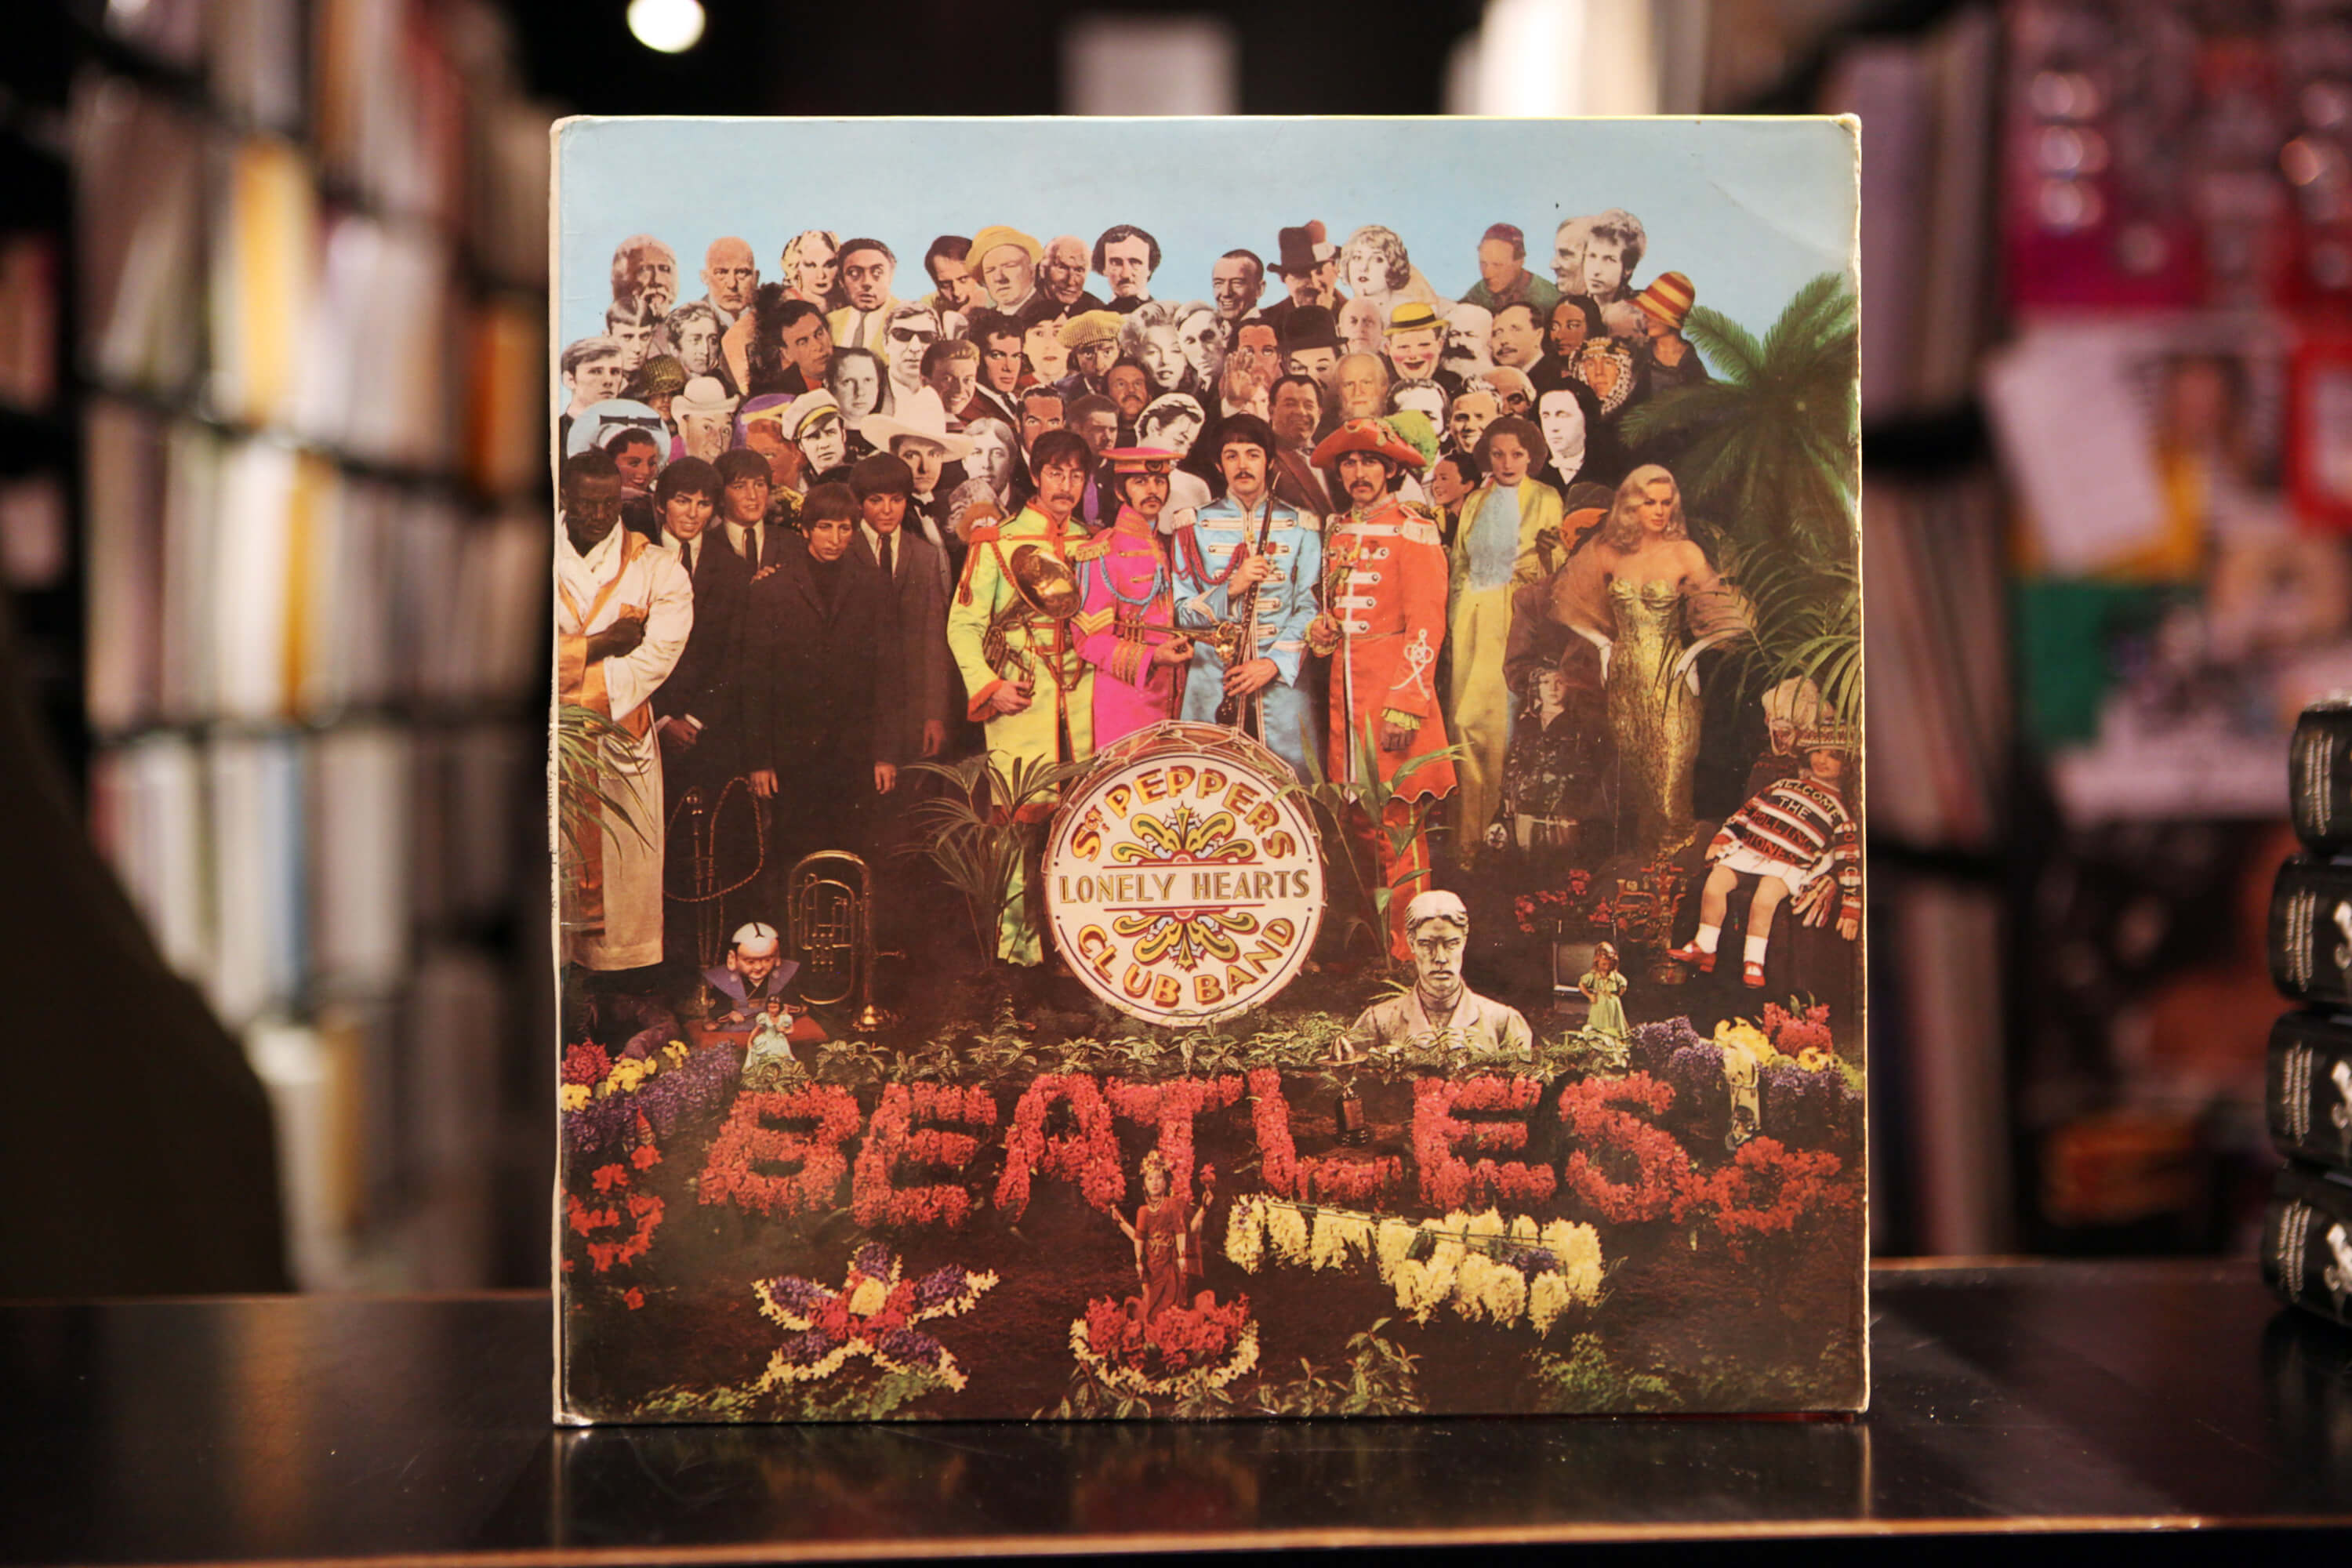 A vinyl copy of The Beatles' 'Sgt. Peppers Lonely Hearts Club Band'